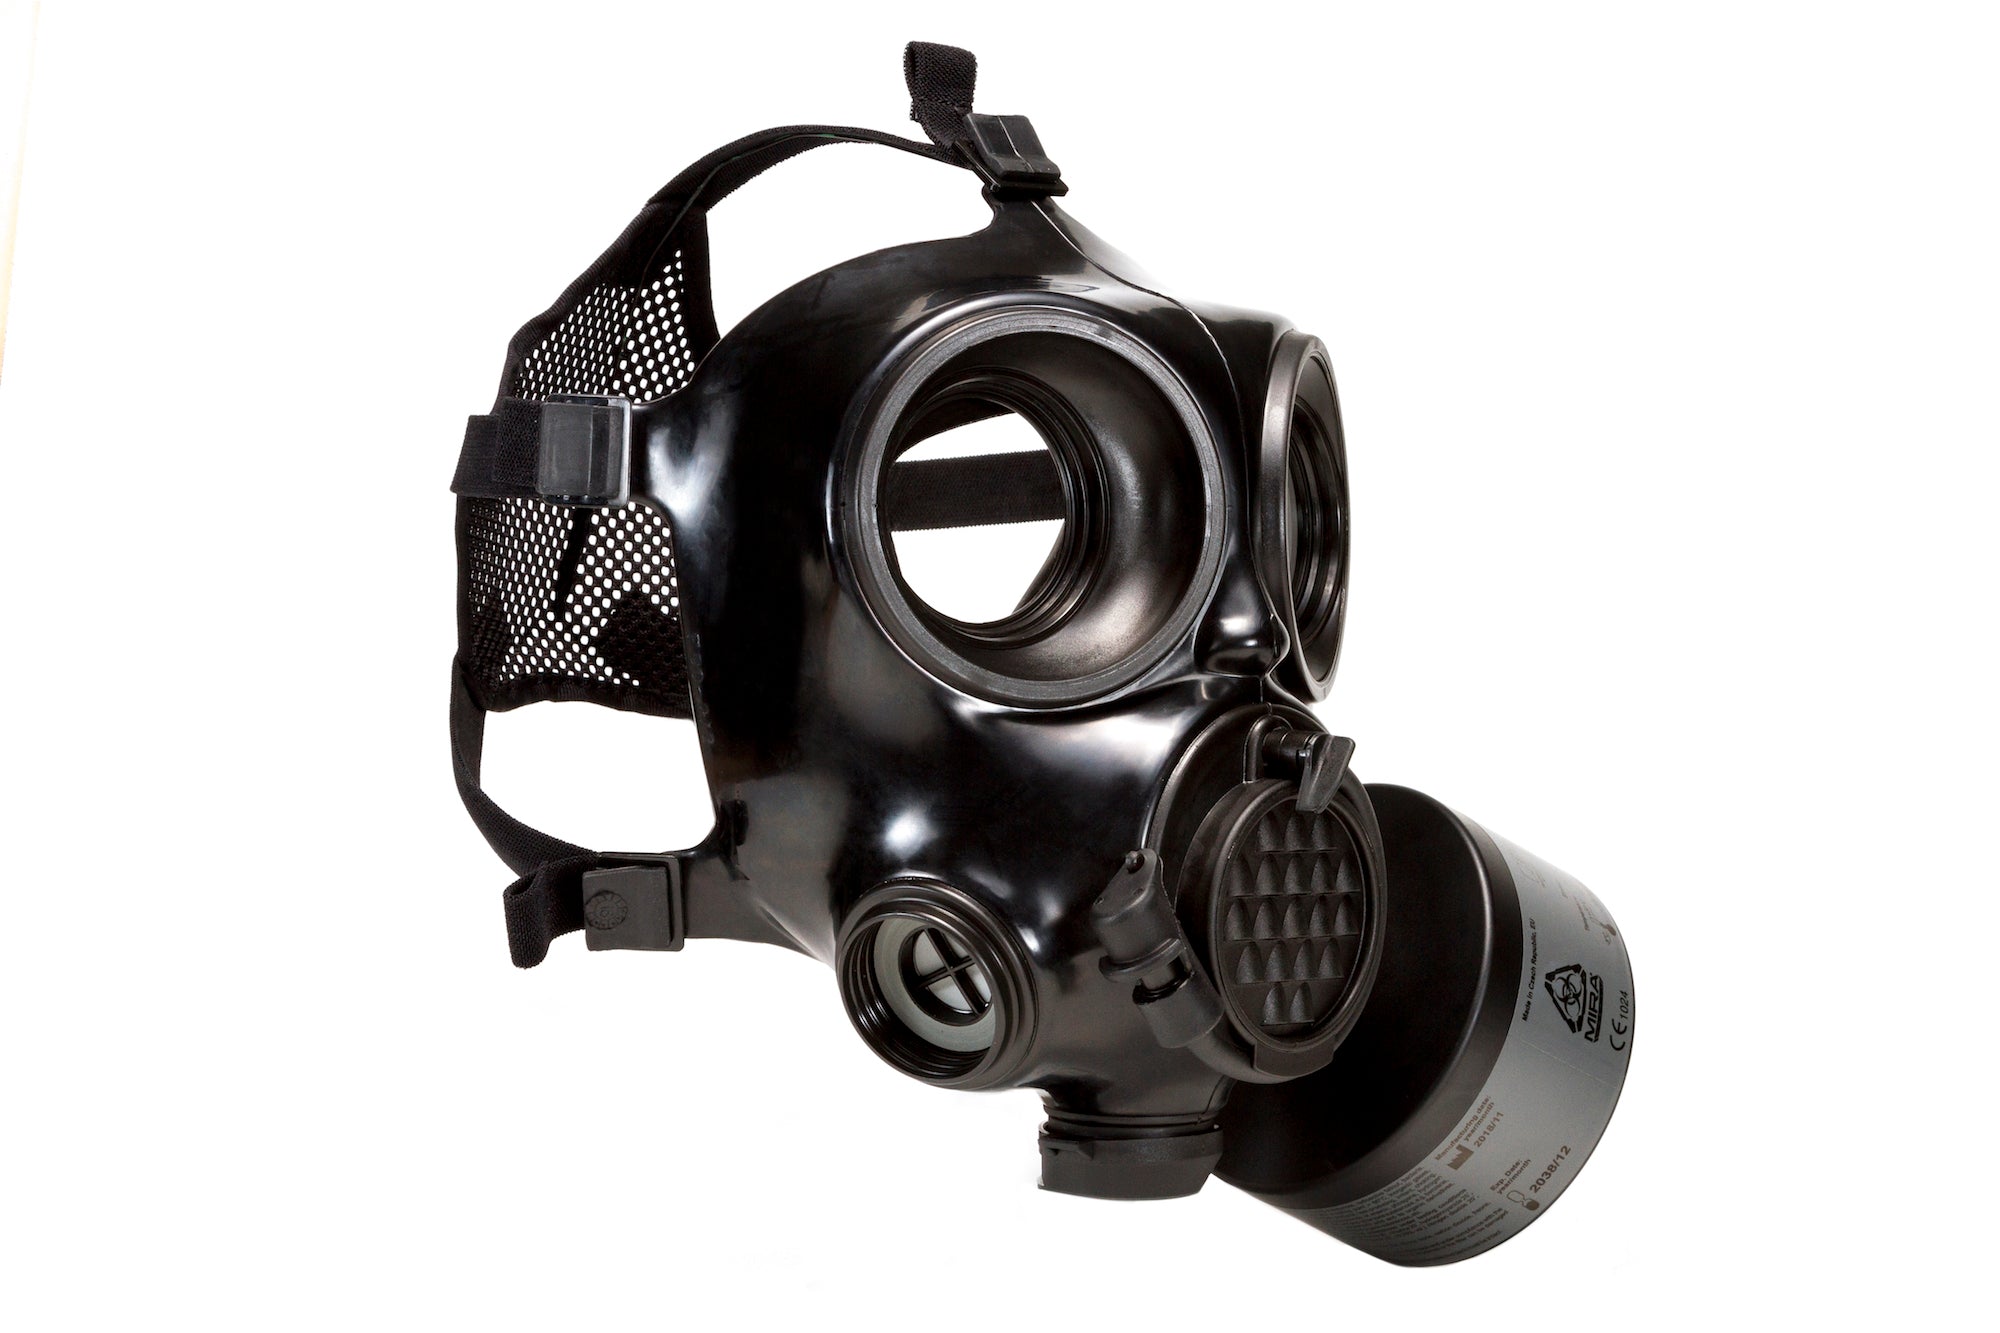 high military grade gas mask for desieses